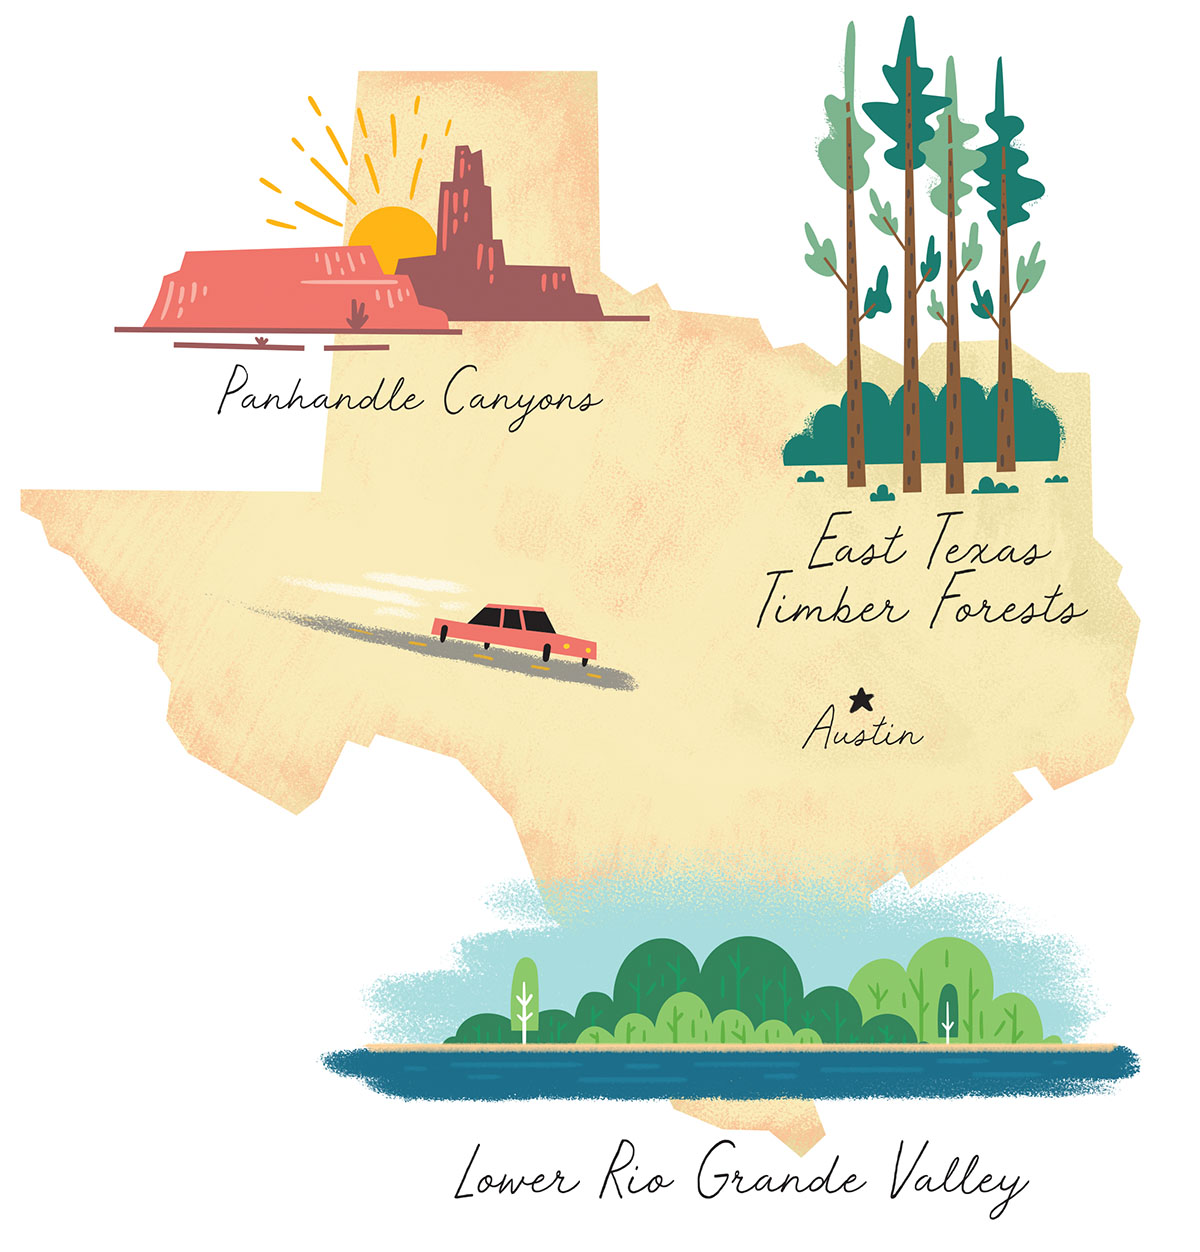 An illustrated map showing panhandle canyons, east texas timber forests and the Rio Grande valley